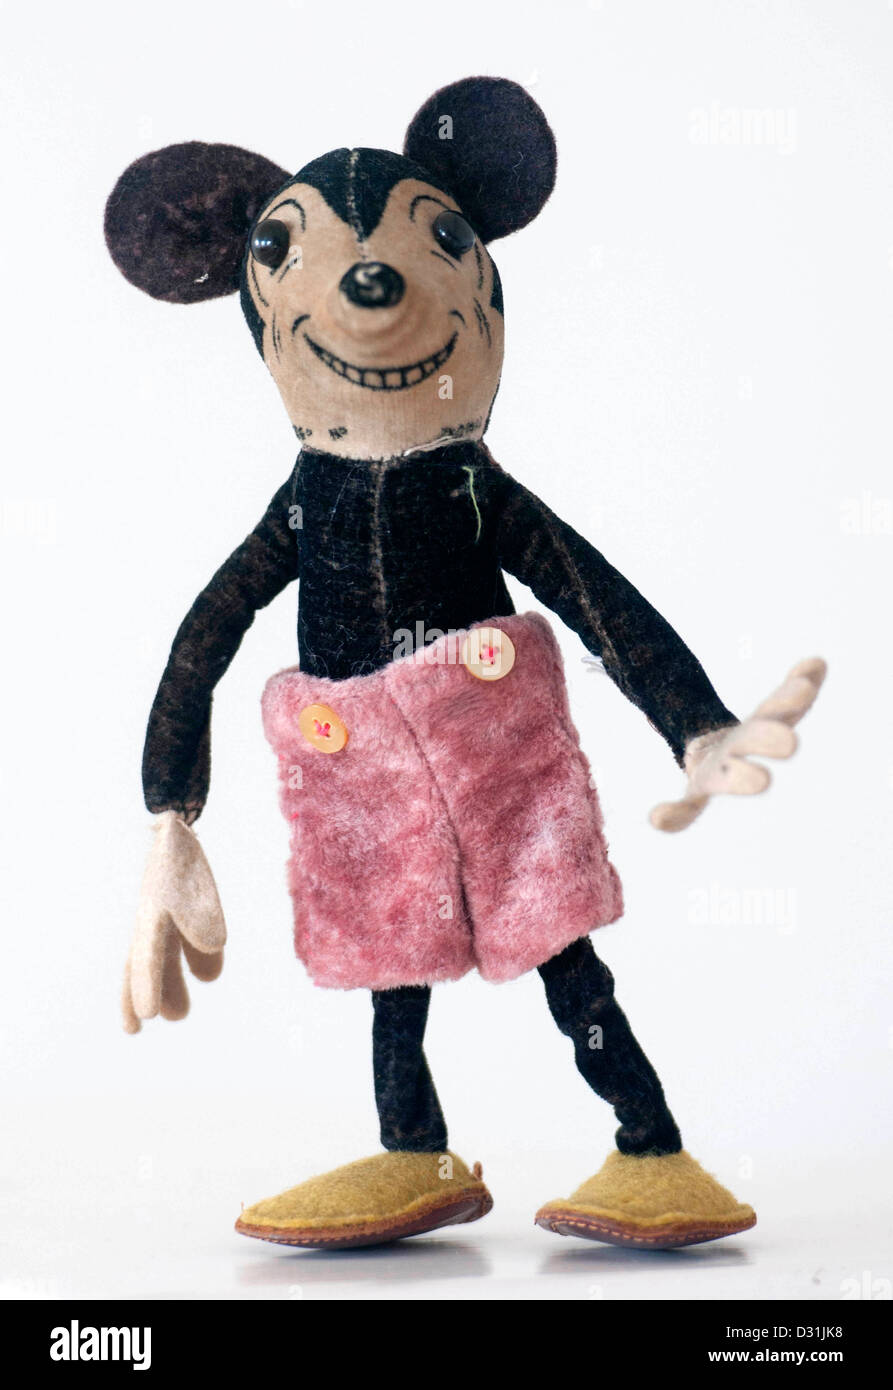 Vintage Mickey Mouse Soft Toy From The 1920s Stock Photo 53511676 Alamy